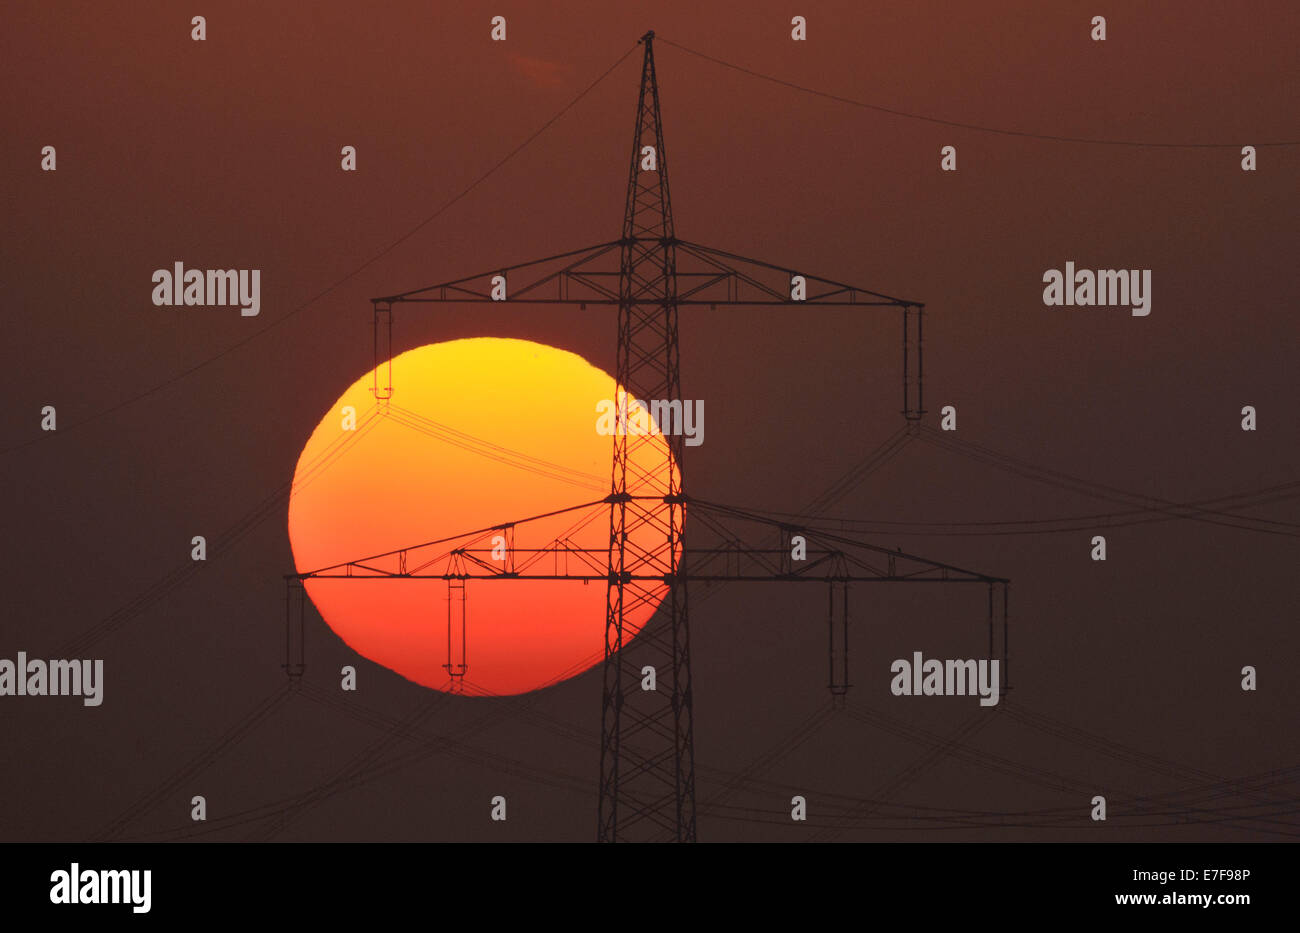 Sehnde, Germany. 16th Sep, 2014. Sunrise behind a power pylon near Sehnde, Germany, 16 September 2014. Indian summer, or Altweibersommer in German, is a weather phenomenon which often brings sunny weather between mid-September and the start of October. Photo: JULIAN STRATENSCHULTE/DPA/Alamy Live News Stock Photo